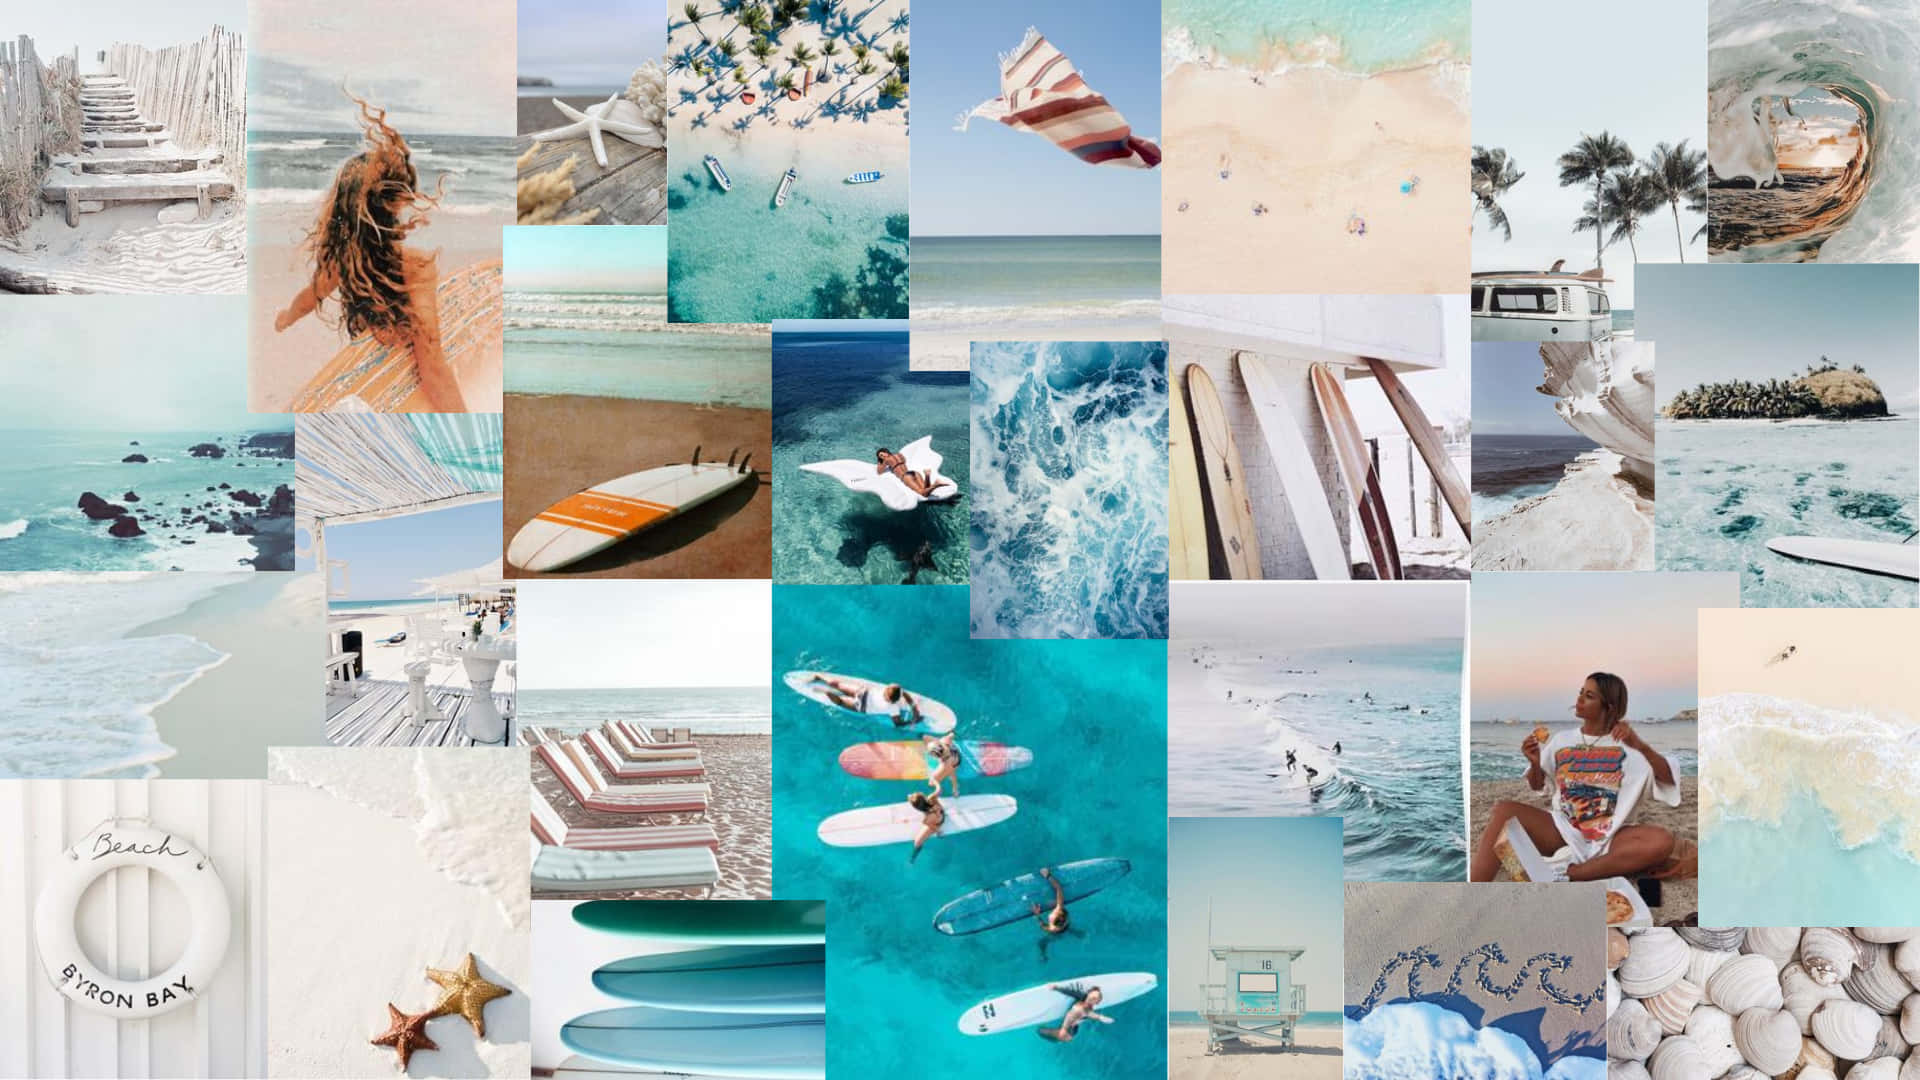 Download Enjoying the summer season while completing your digital tasks with a fashionable collage aesthetic laptop. Wallpaper